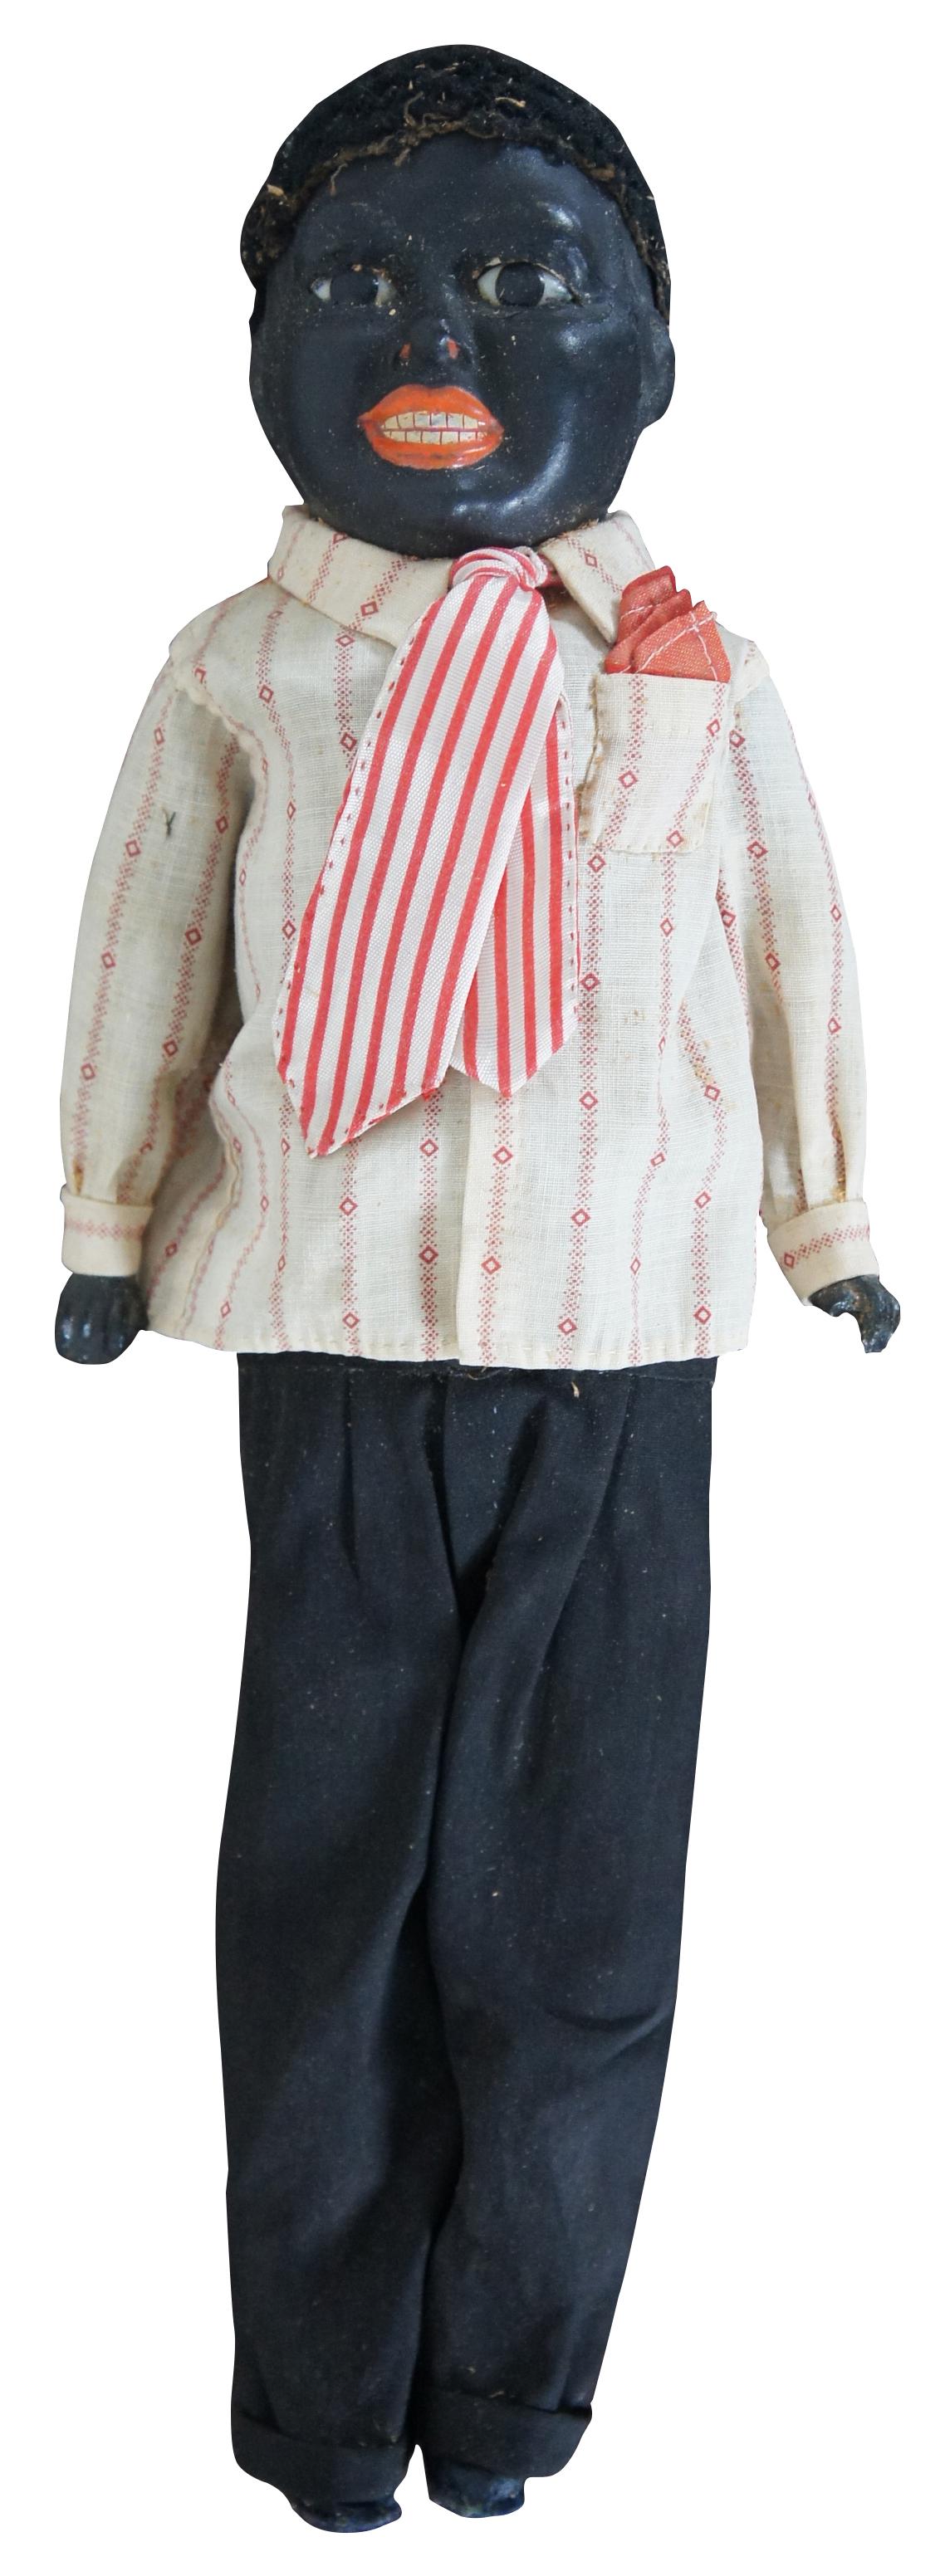 Antique 19th century black doll shaped like a young boy with bisque head, hands and feet, glass eyes, and sawdust filled cloth body, dressed in a striped shirt, matching tie and pocket square, black pants and navy blue leather shoes. Measures: